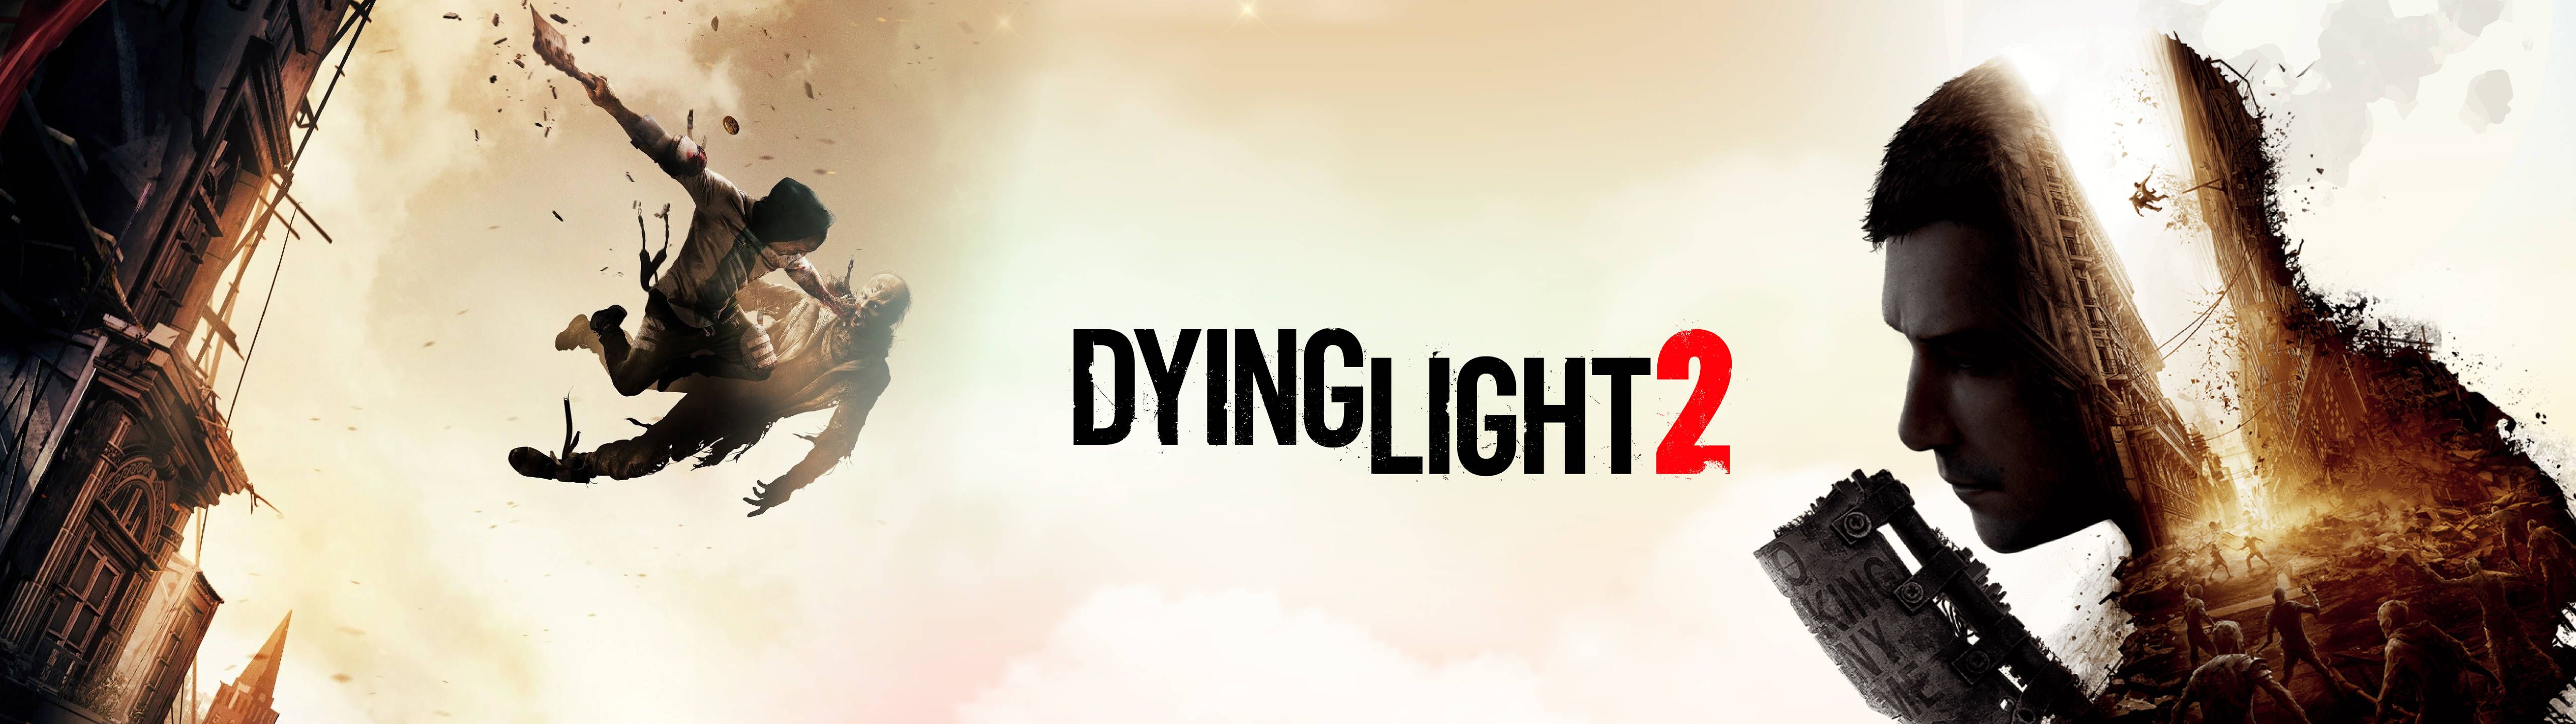 Download Dying Light 2 5120x1440 Gaming Wallpaper